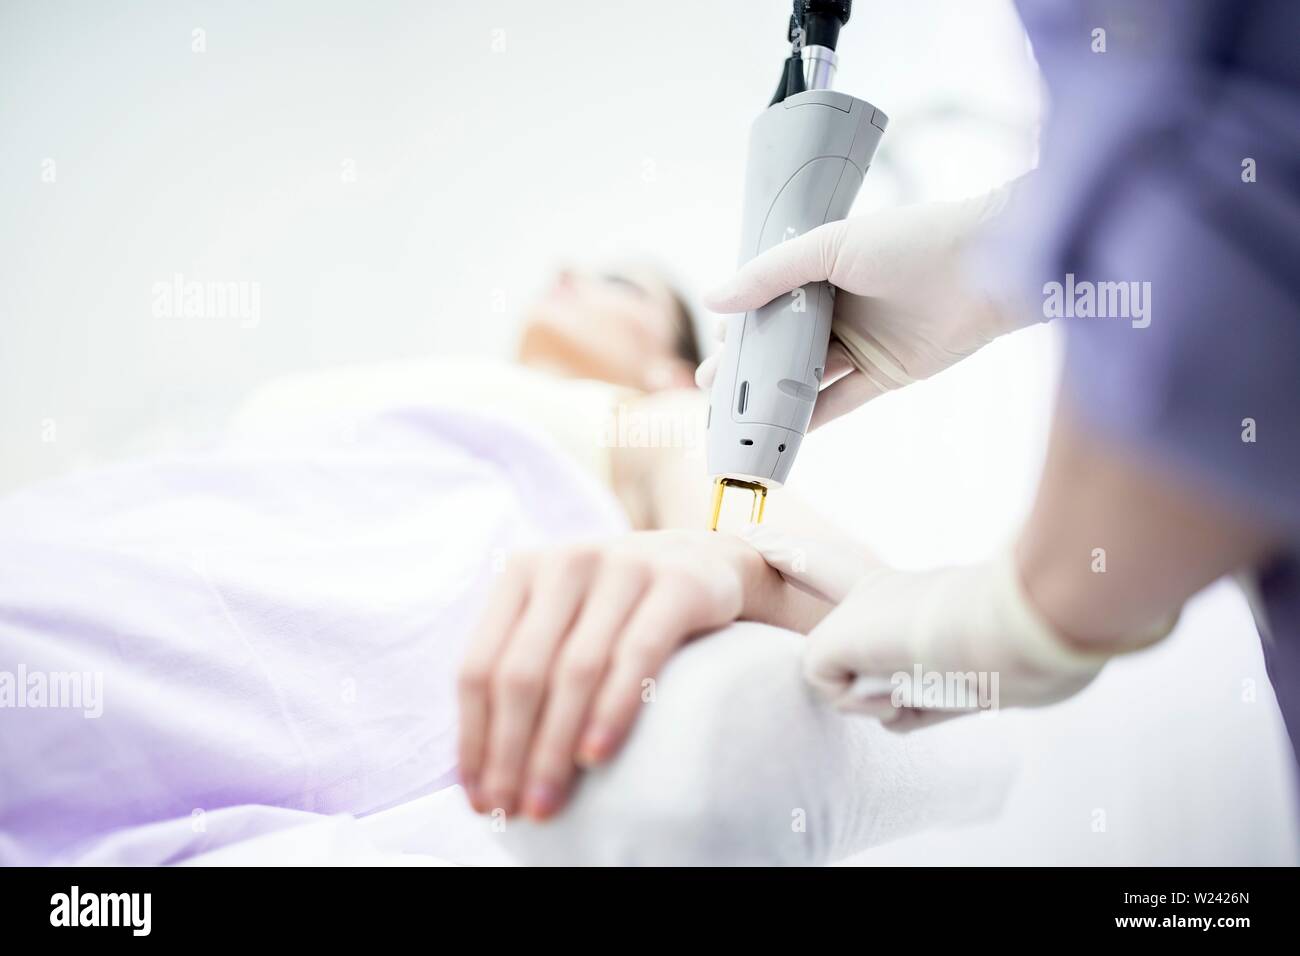 Young woman getting laser hair removal treatment on wrist, close-up. Stock Photo